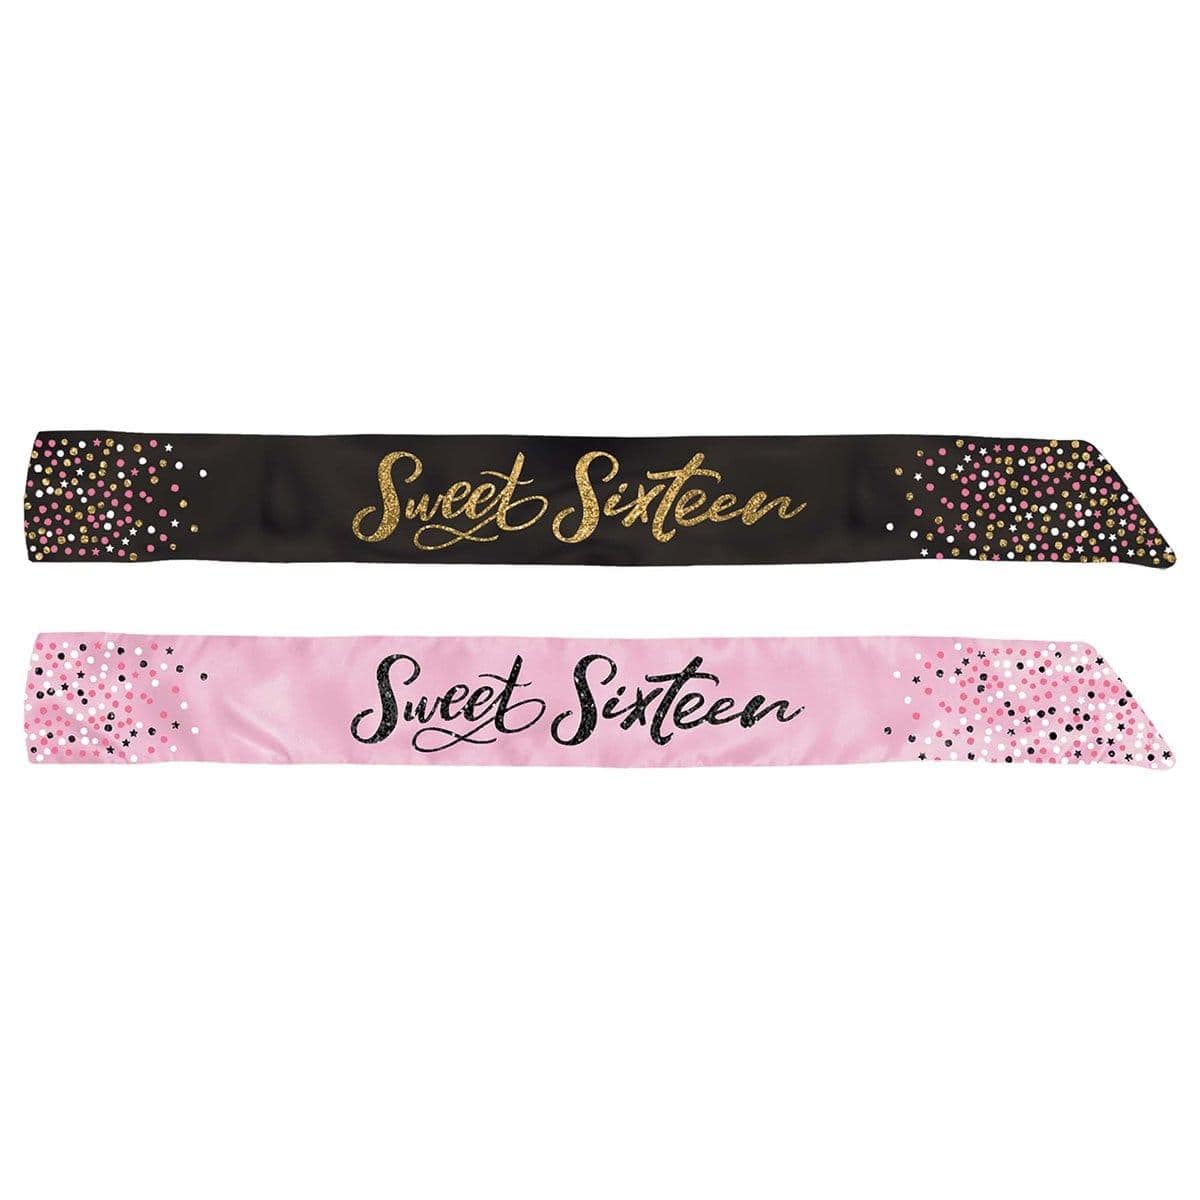 Buy Age Specific Birthday Blush Sixteen - Sash sold at Party Expert